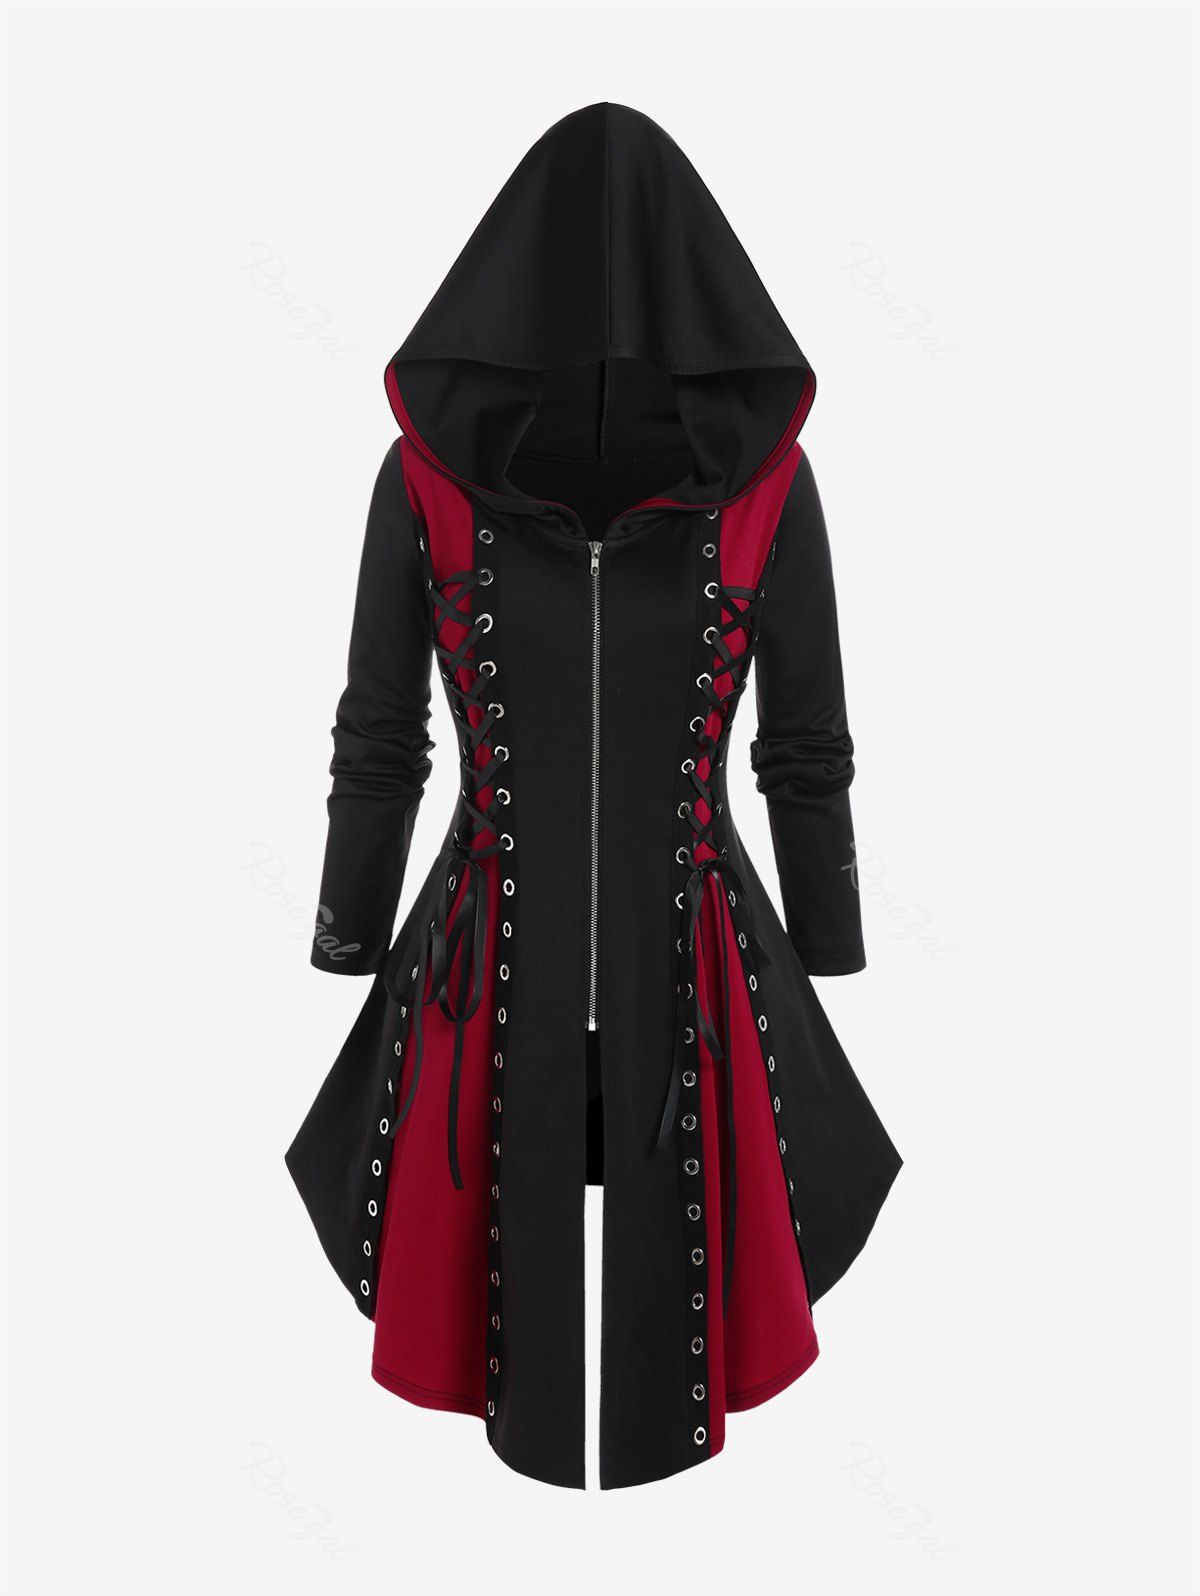 Online Hooded Lace Up Grommets Colorblock Gothic Coat  